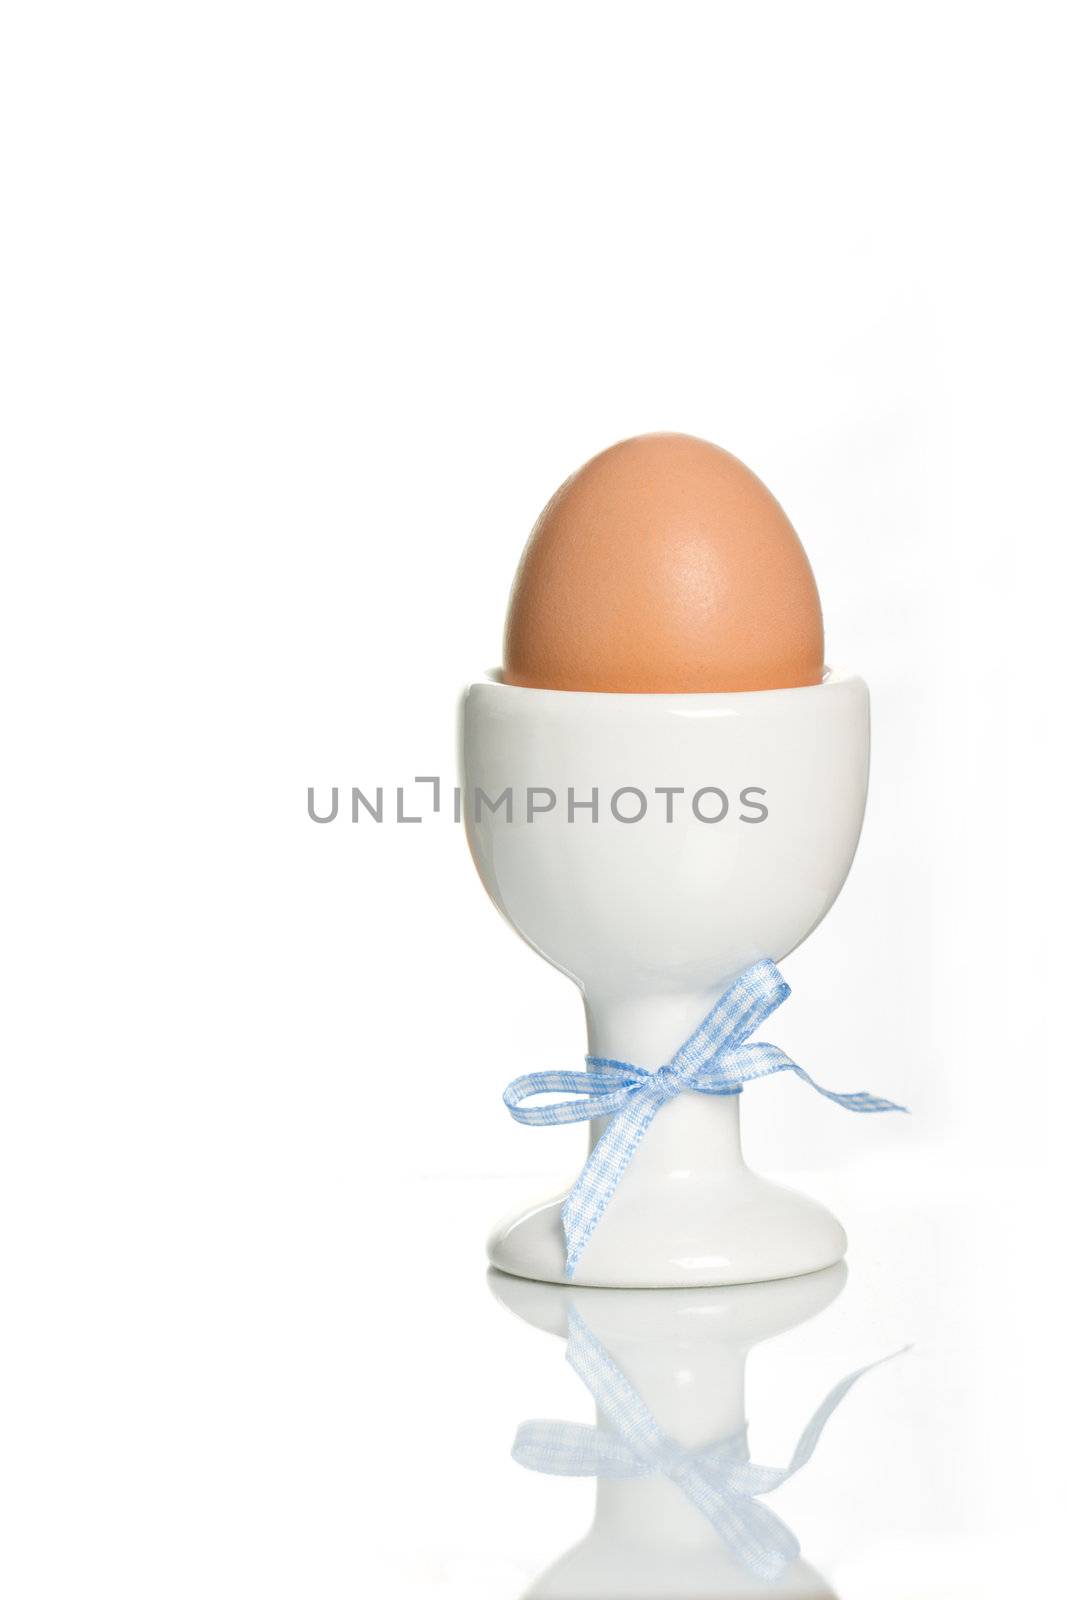 Single egg in a white egg cup